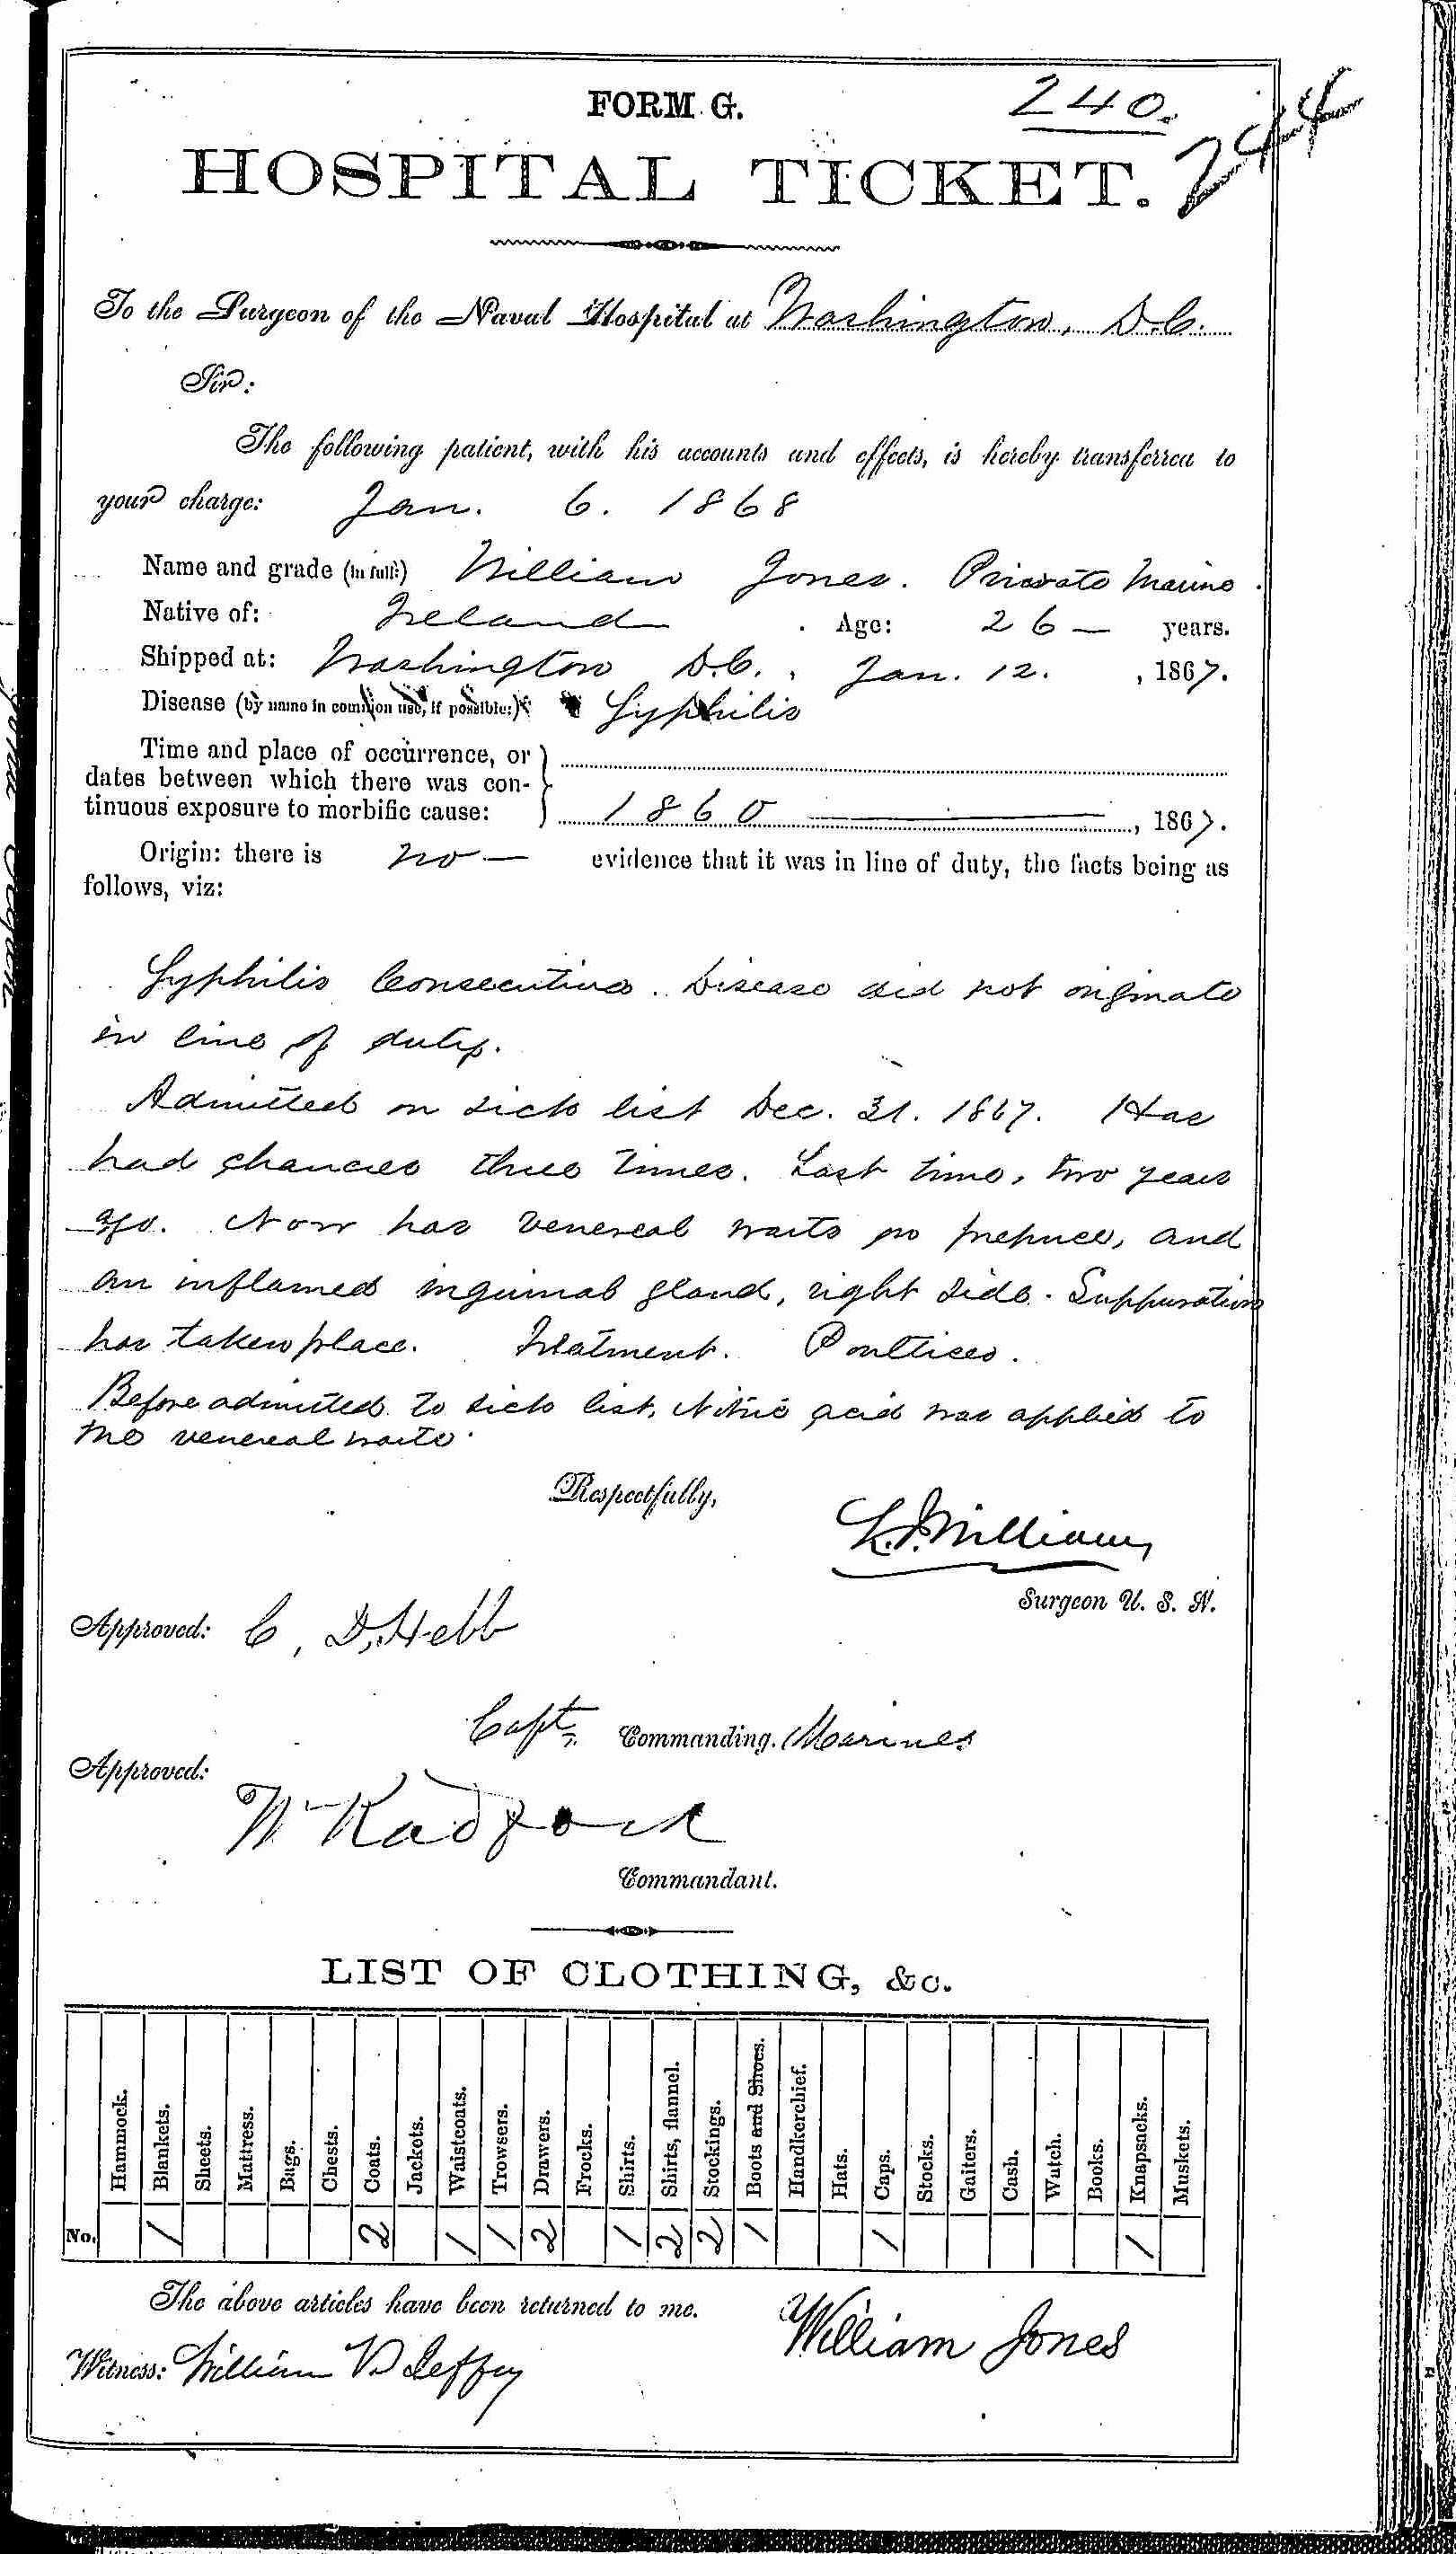 Entry for William Jones (second admission page 1 of 2) in the log Hospital Tickets and Case Papers - Naval Hospital - Washington, D.C. - 1866-68